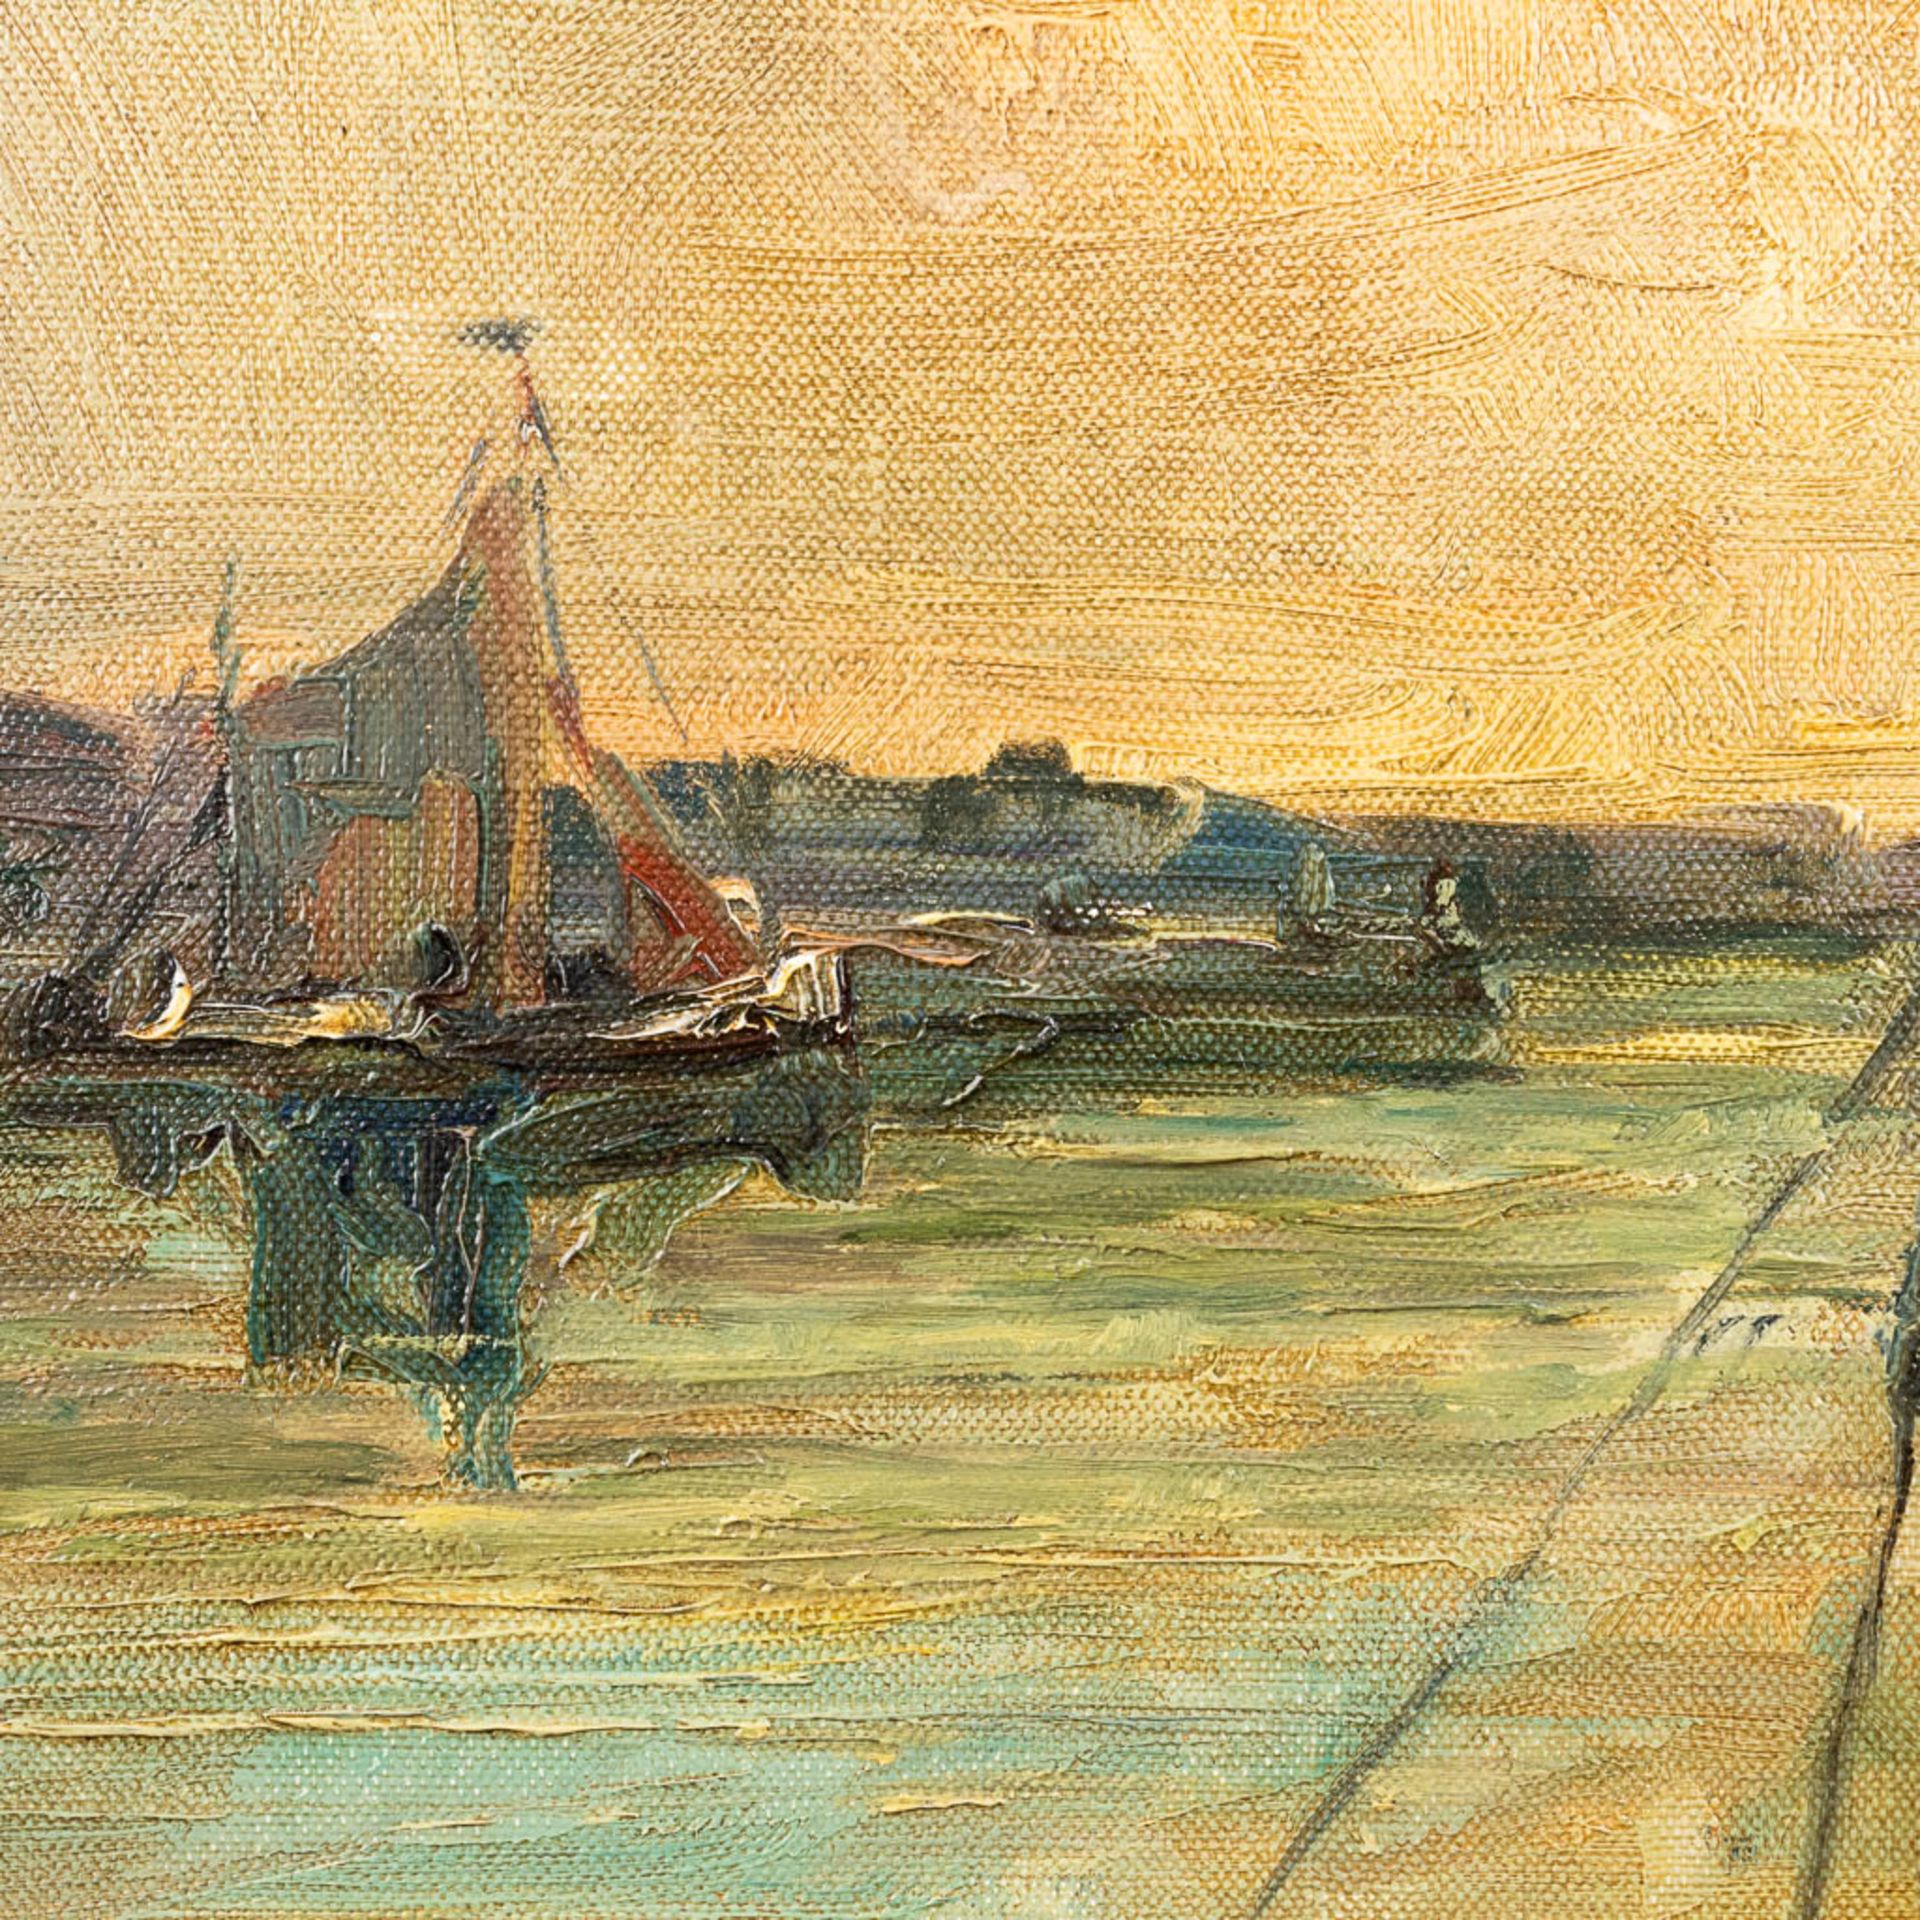 Auguste VANDECASTEELE (1889-1969) 'The Harbor', oil on canvas. (W: 85 x H: 90 cm) - Image 6 of 9